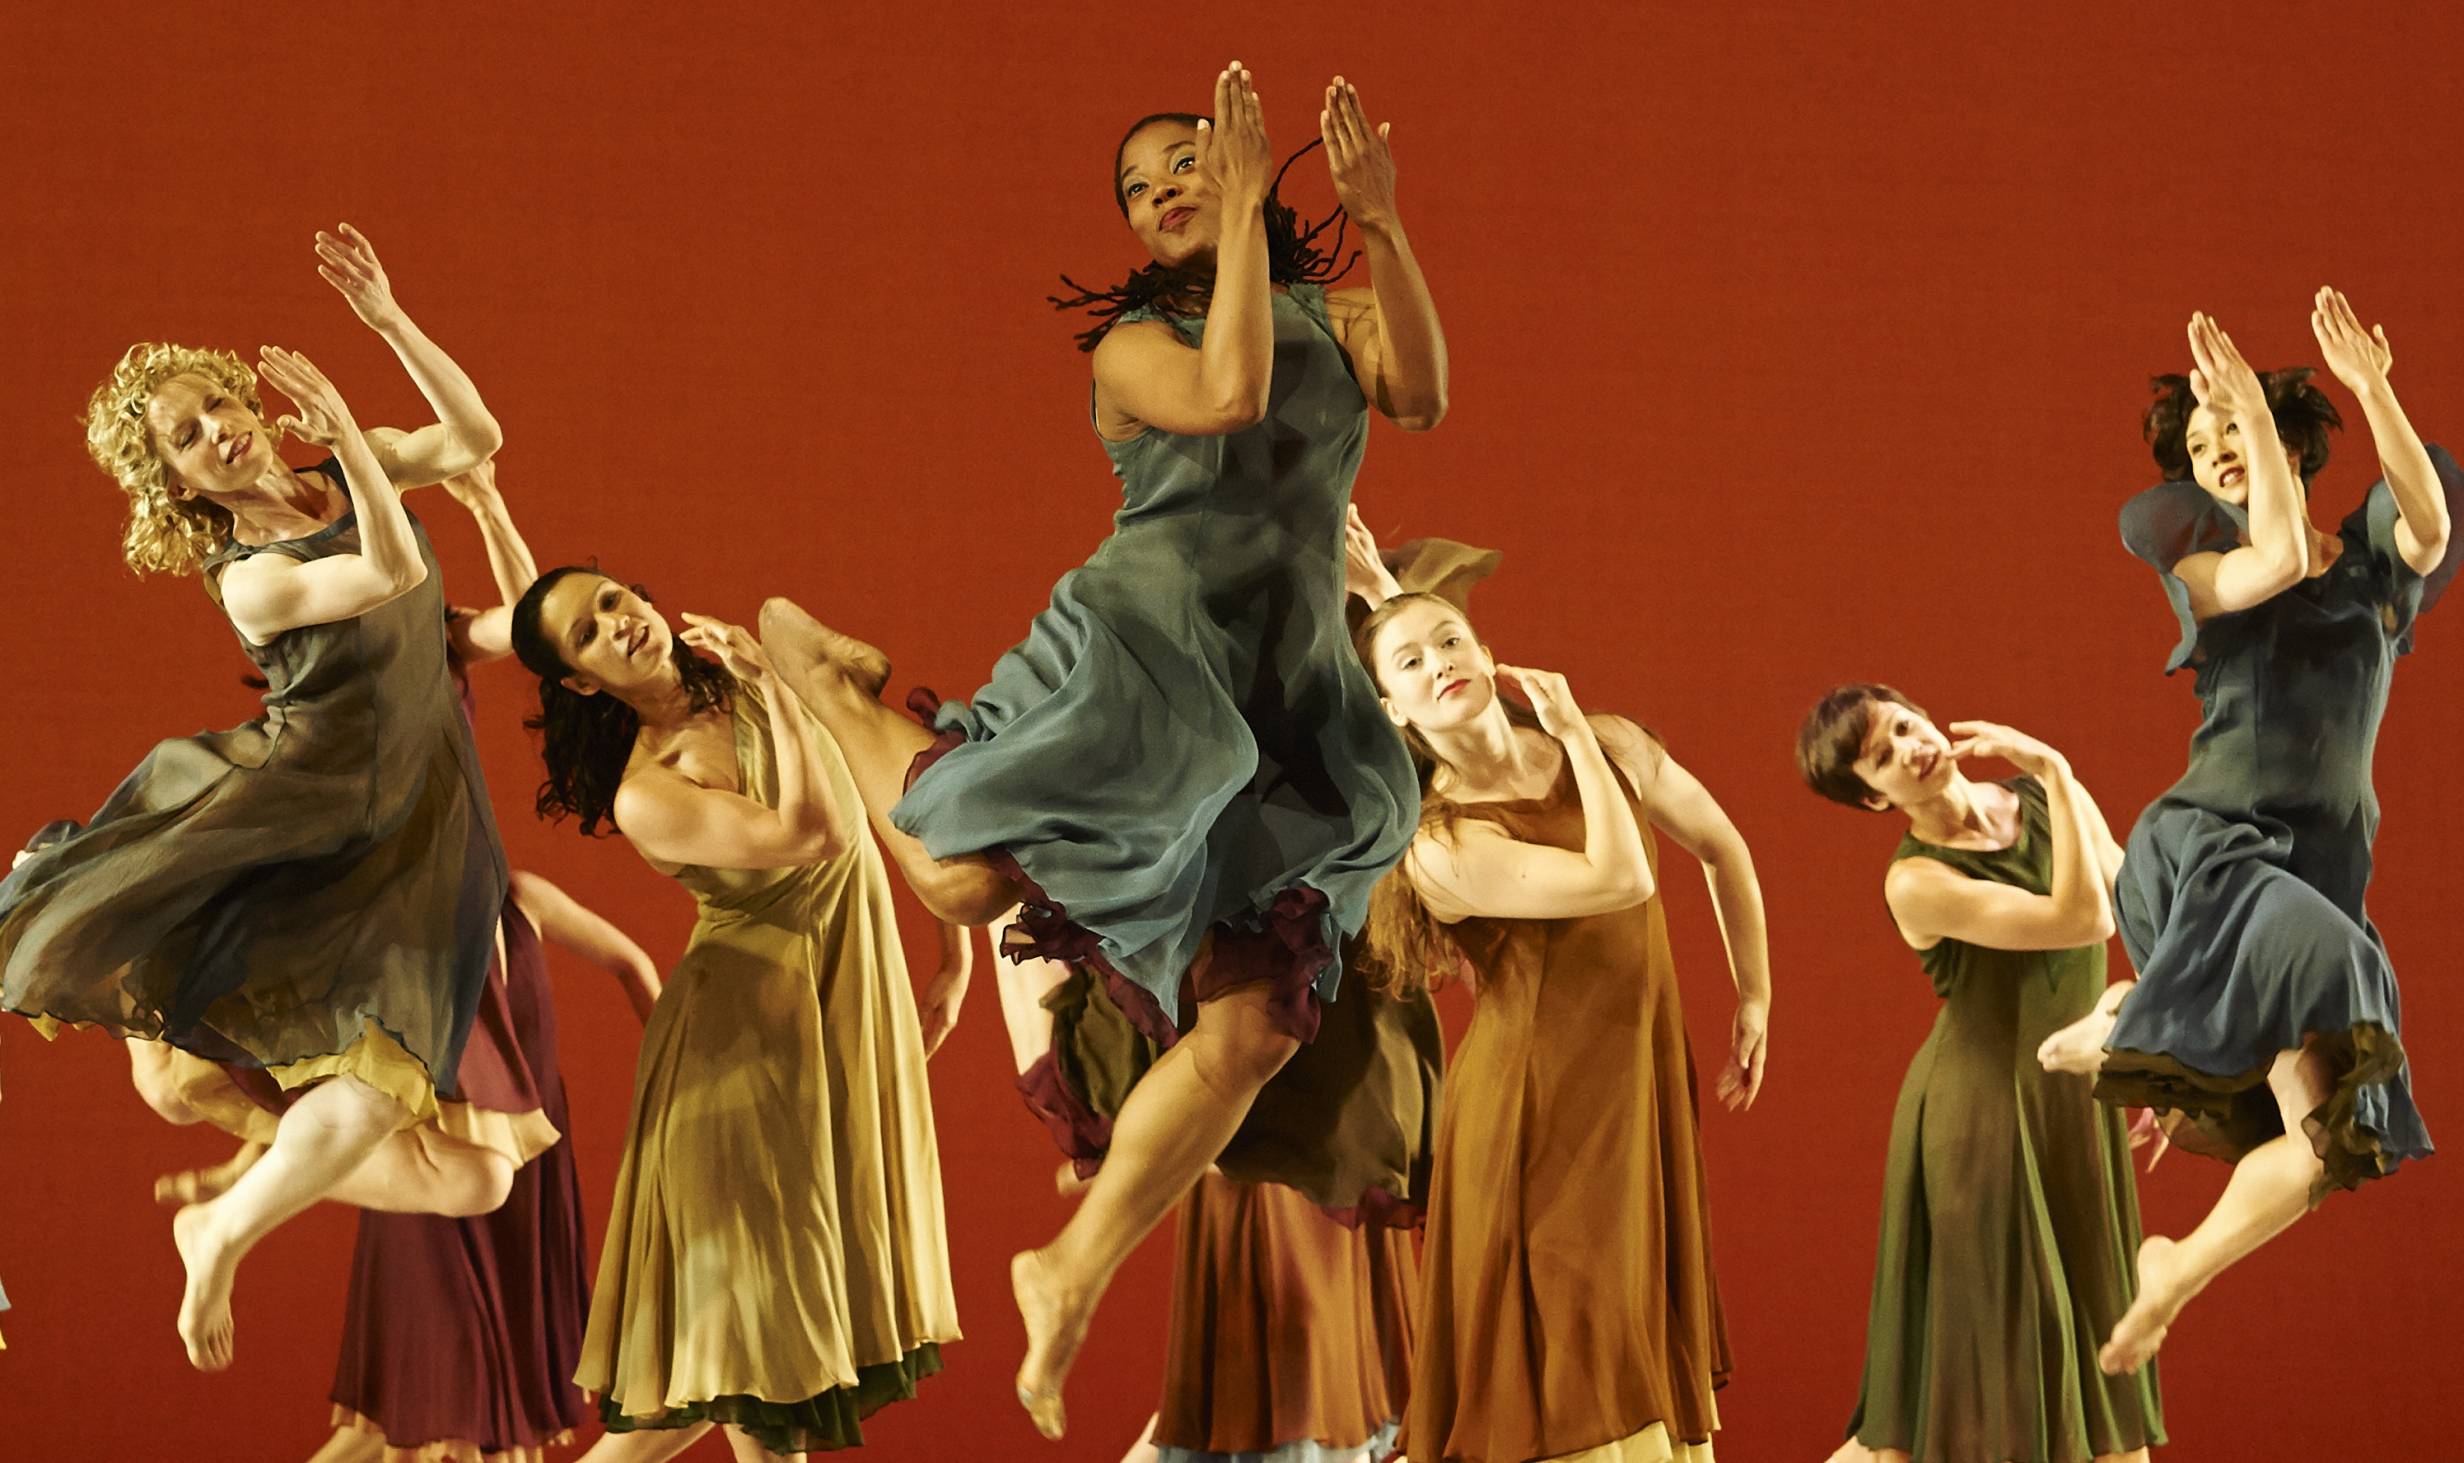 Dance, music, and history: the Mark Morris Dance Group and Music Ensemble